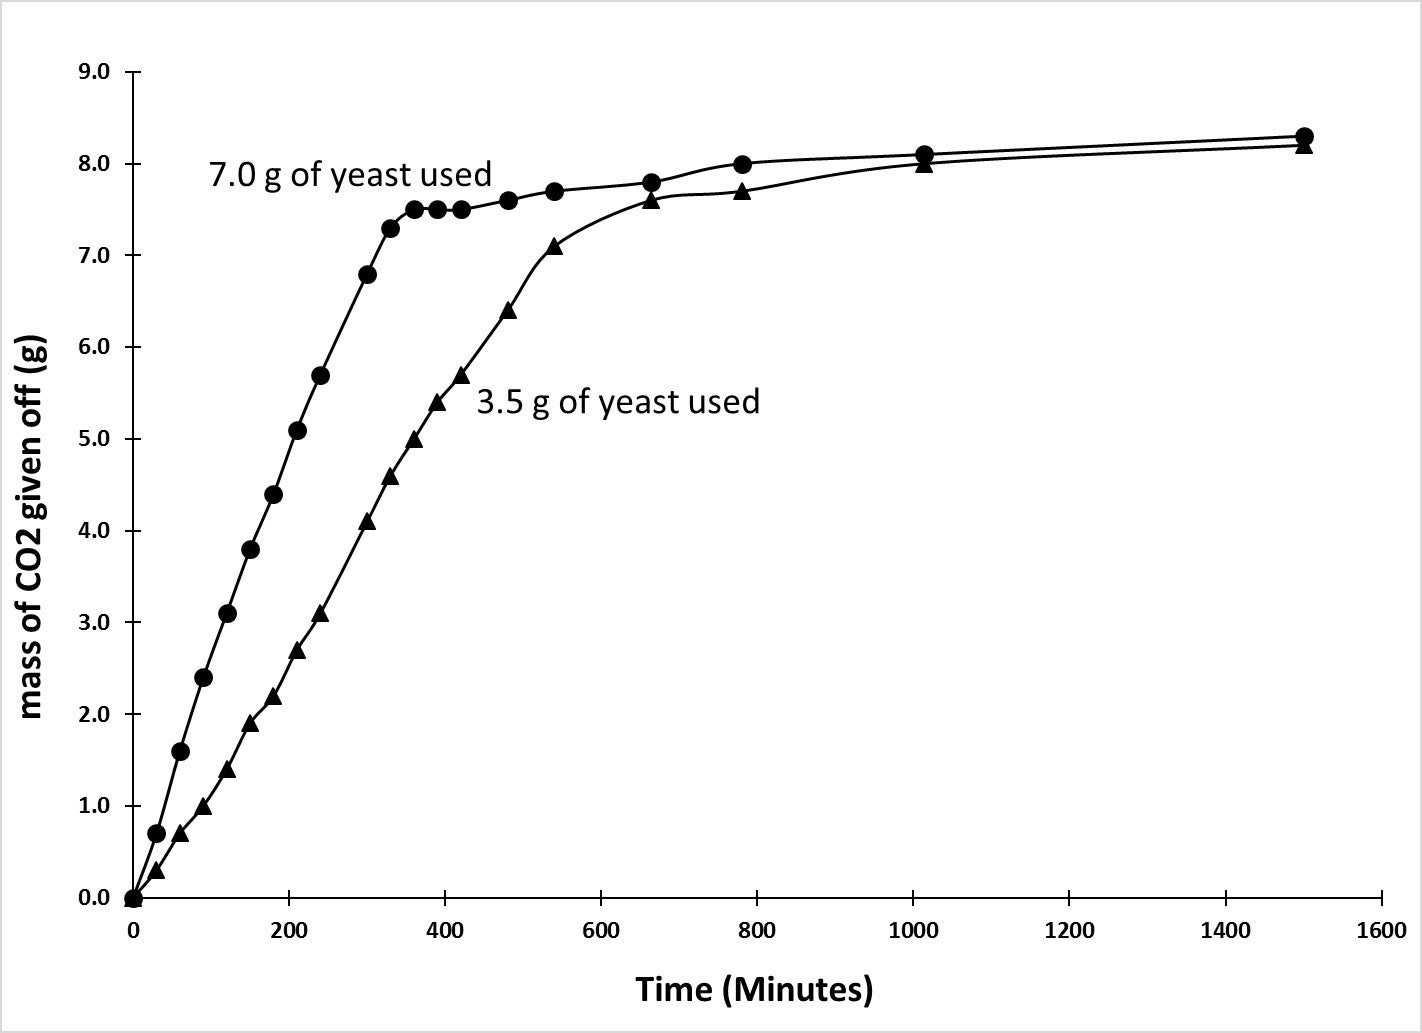 Two sets of data graphing the mass of CO2 (grams) given off vs time (minutes). One line (7.0 g yeast used) is a straight with a steep positive slope that levels off at 400 minutes. One line (3.5 g yeast used) is a straight with a steep positive slope (not as steep as 7.0 g) that levels off at 650 minutes.